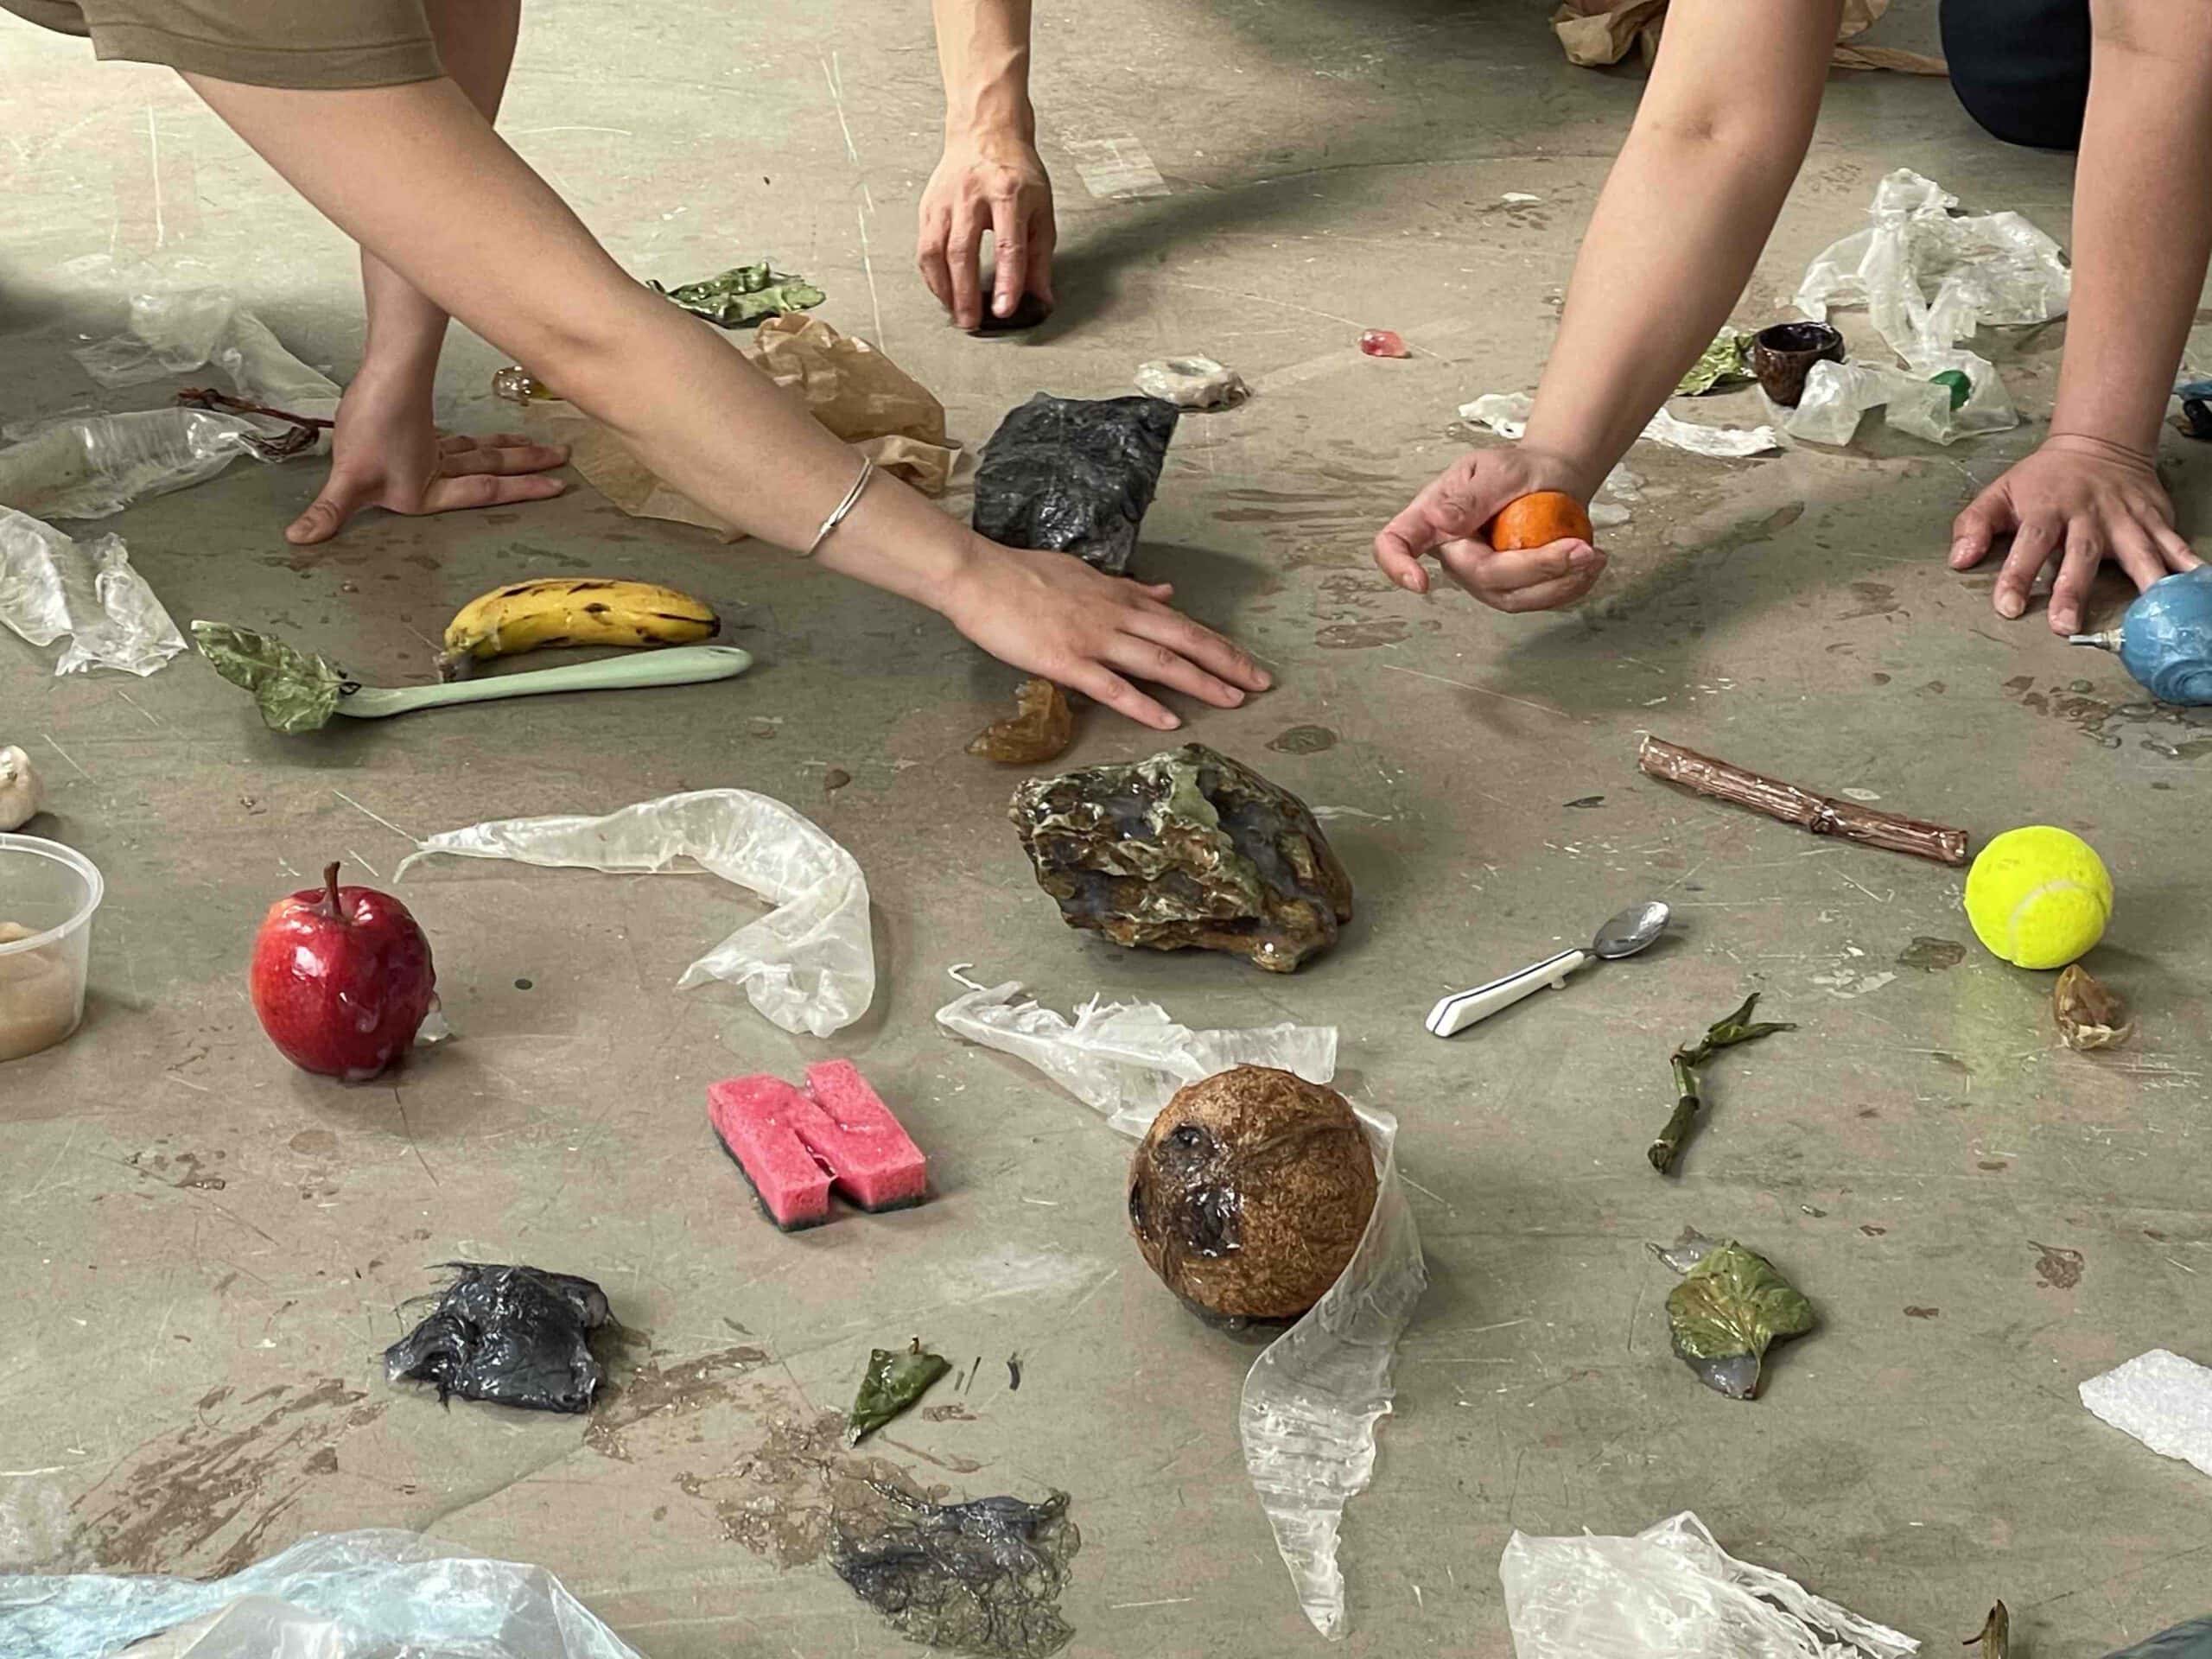 Hands touching and holding objects, a rock, an orange,  on a floor. More objects strewn along the floor.  (This is alt text)